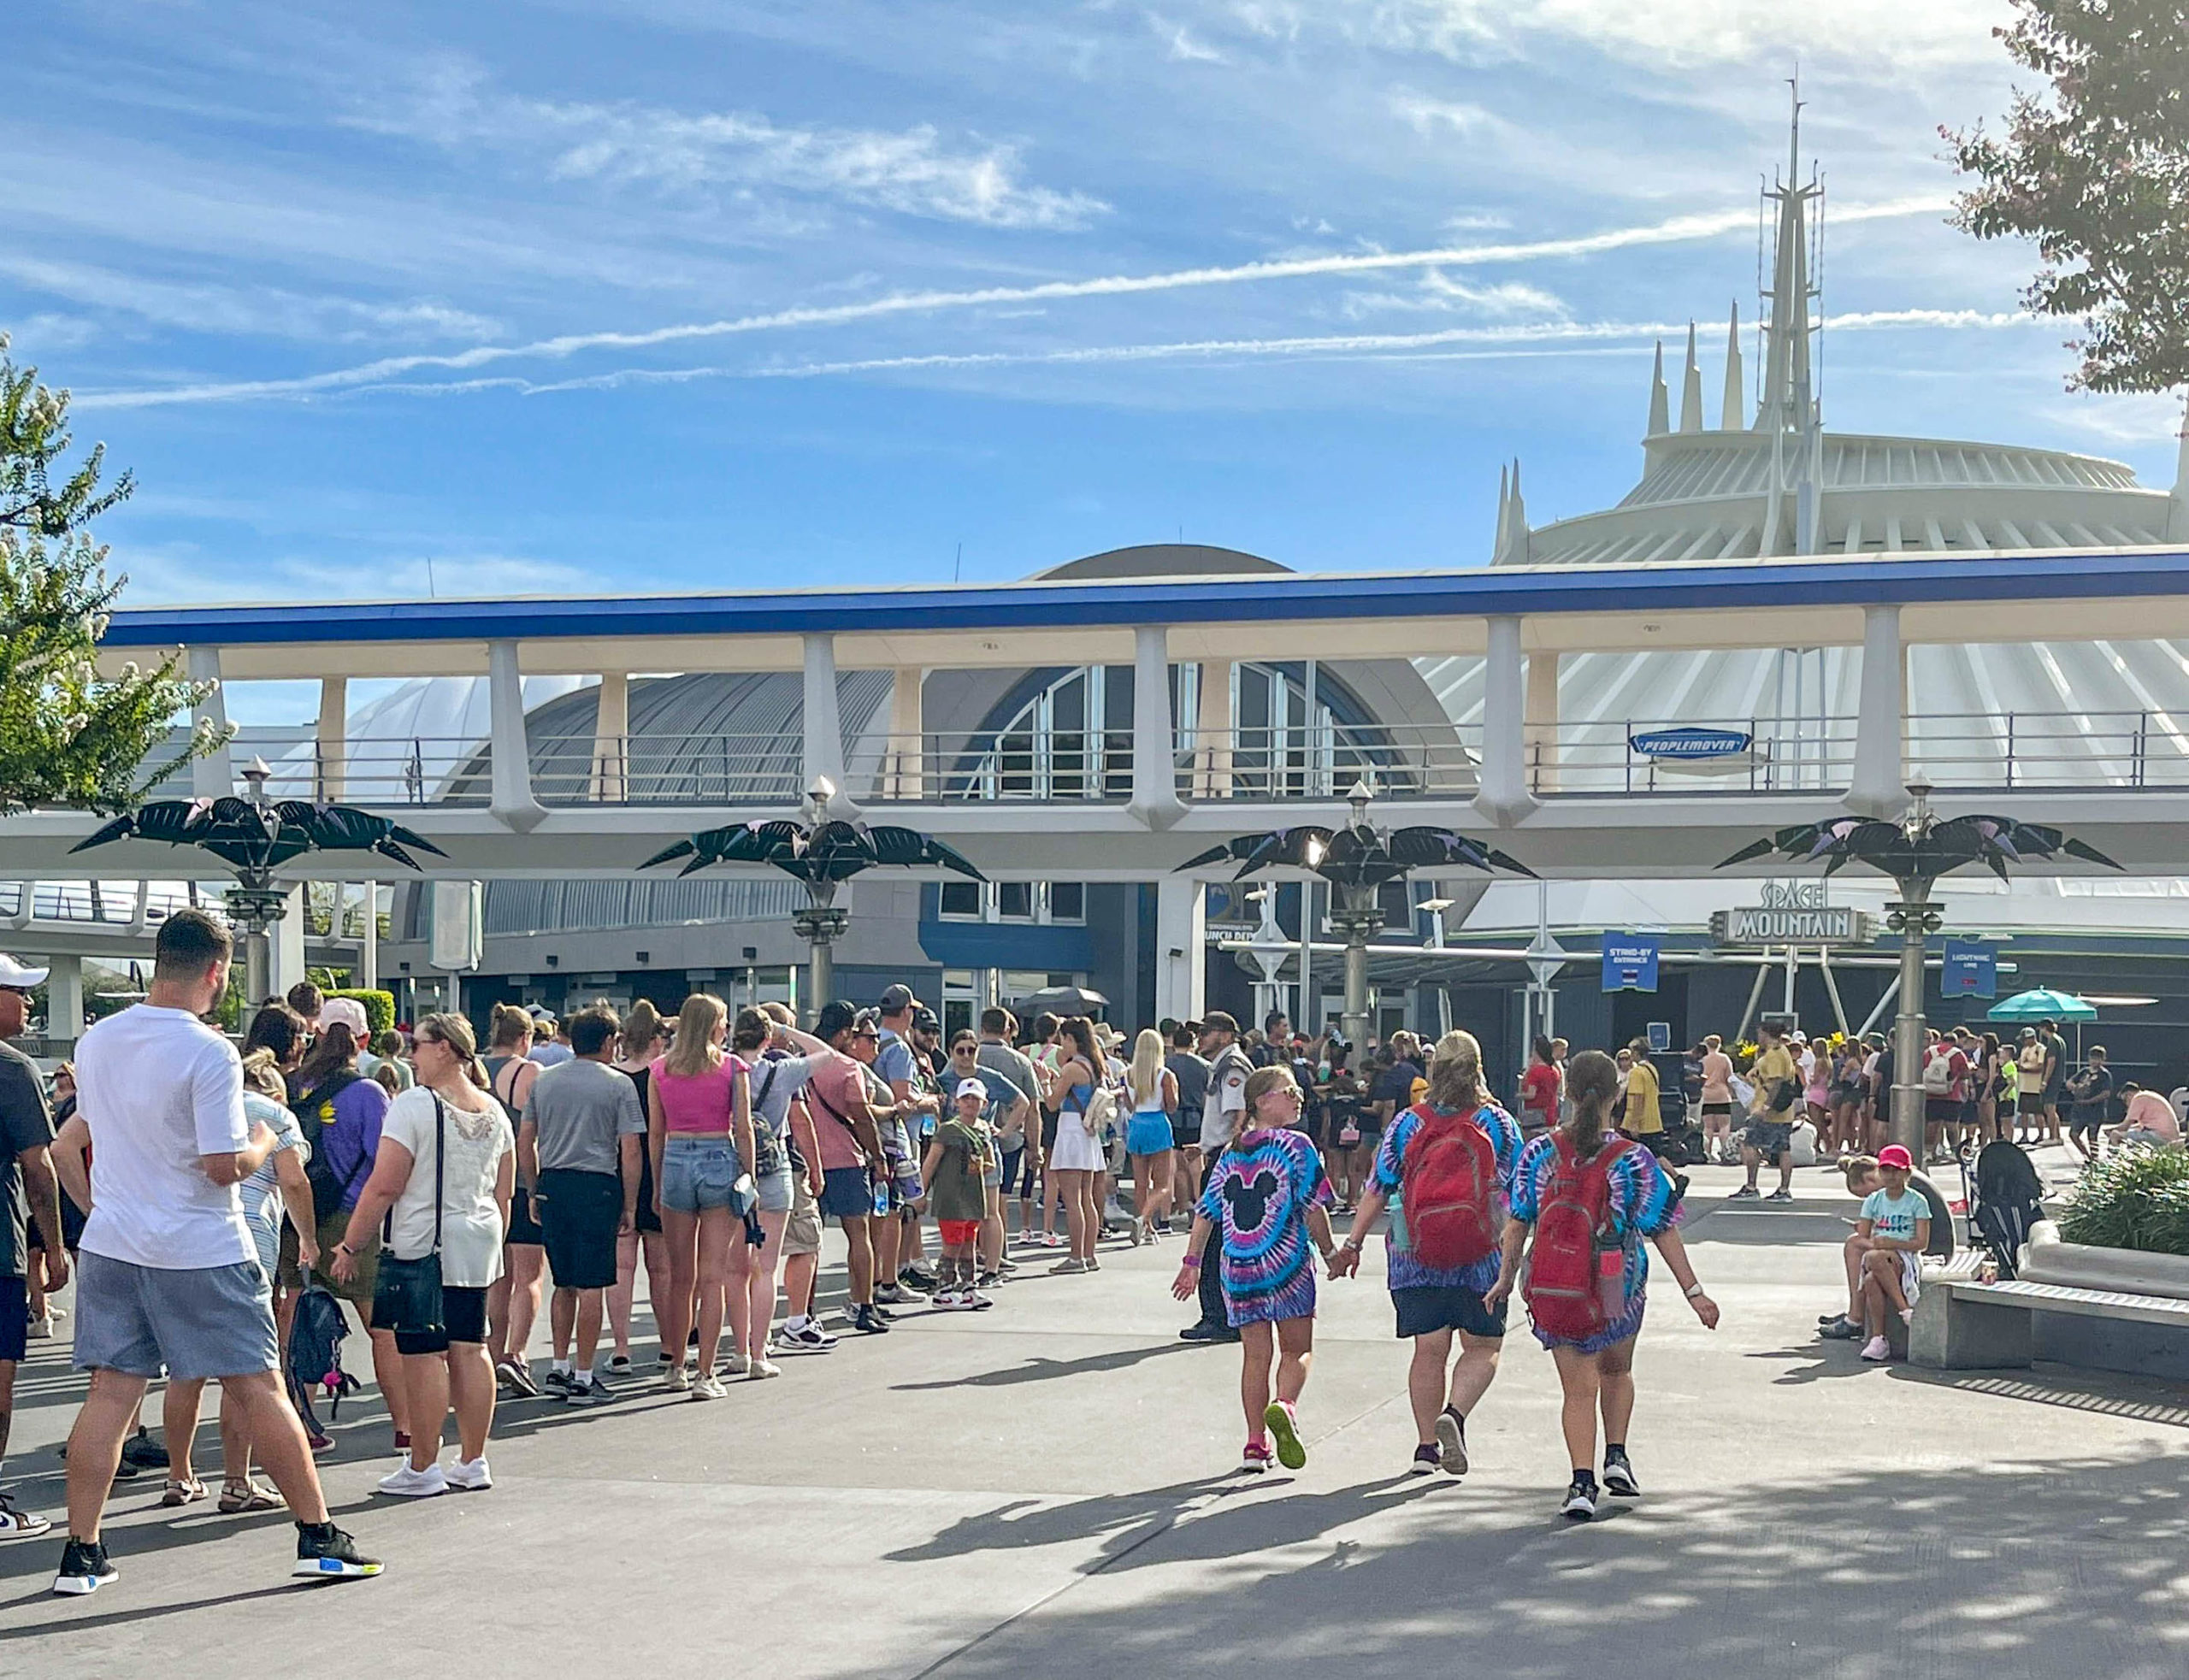 Space Mountain Closed